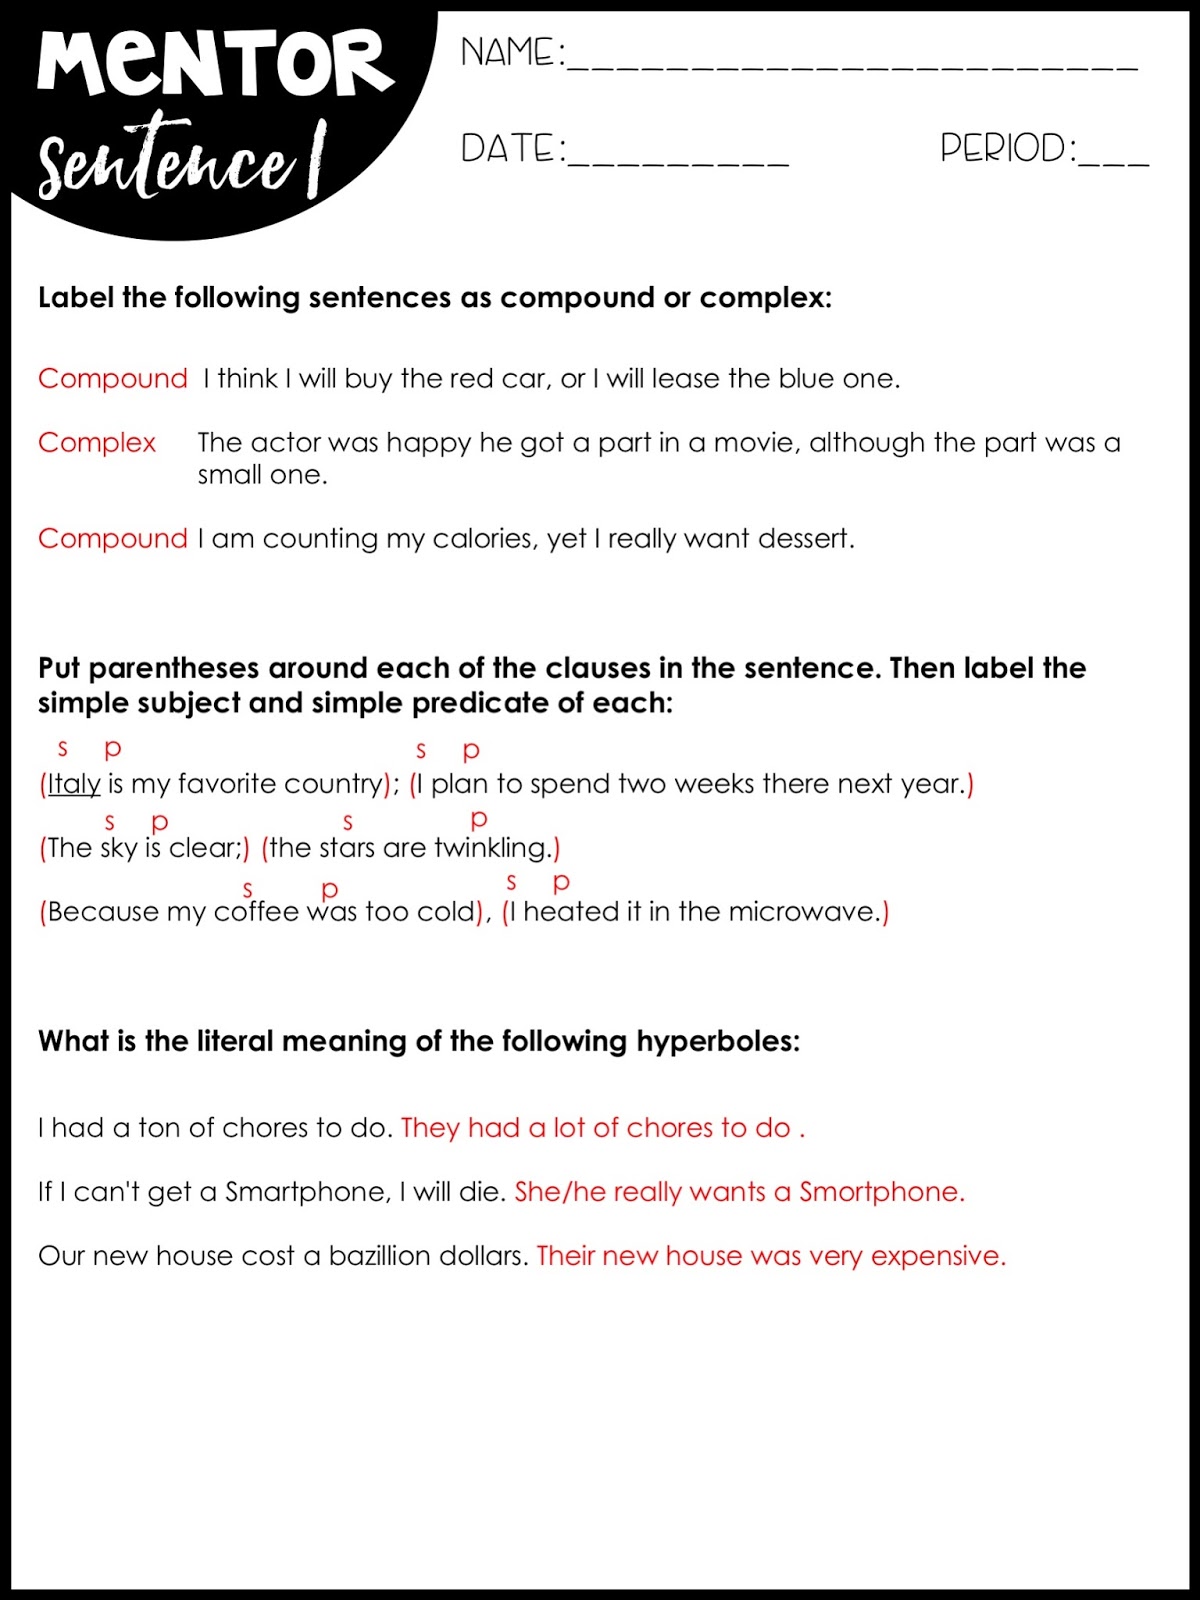 Mentor Sentences 2 Call Of The Wild Worksheets 6th Grade